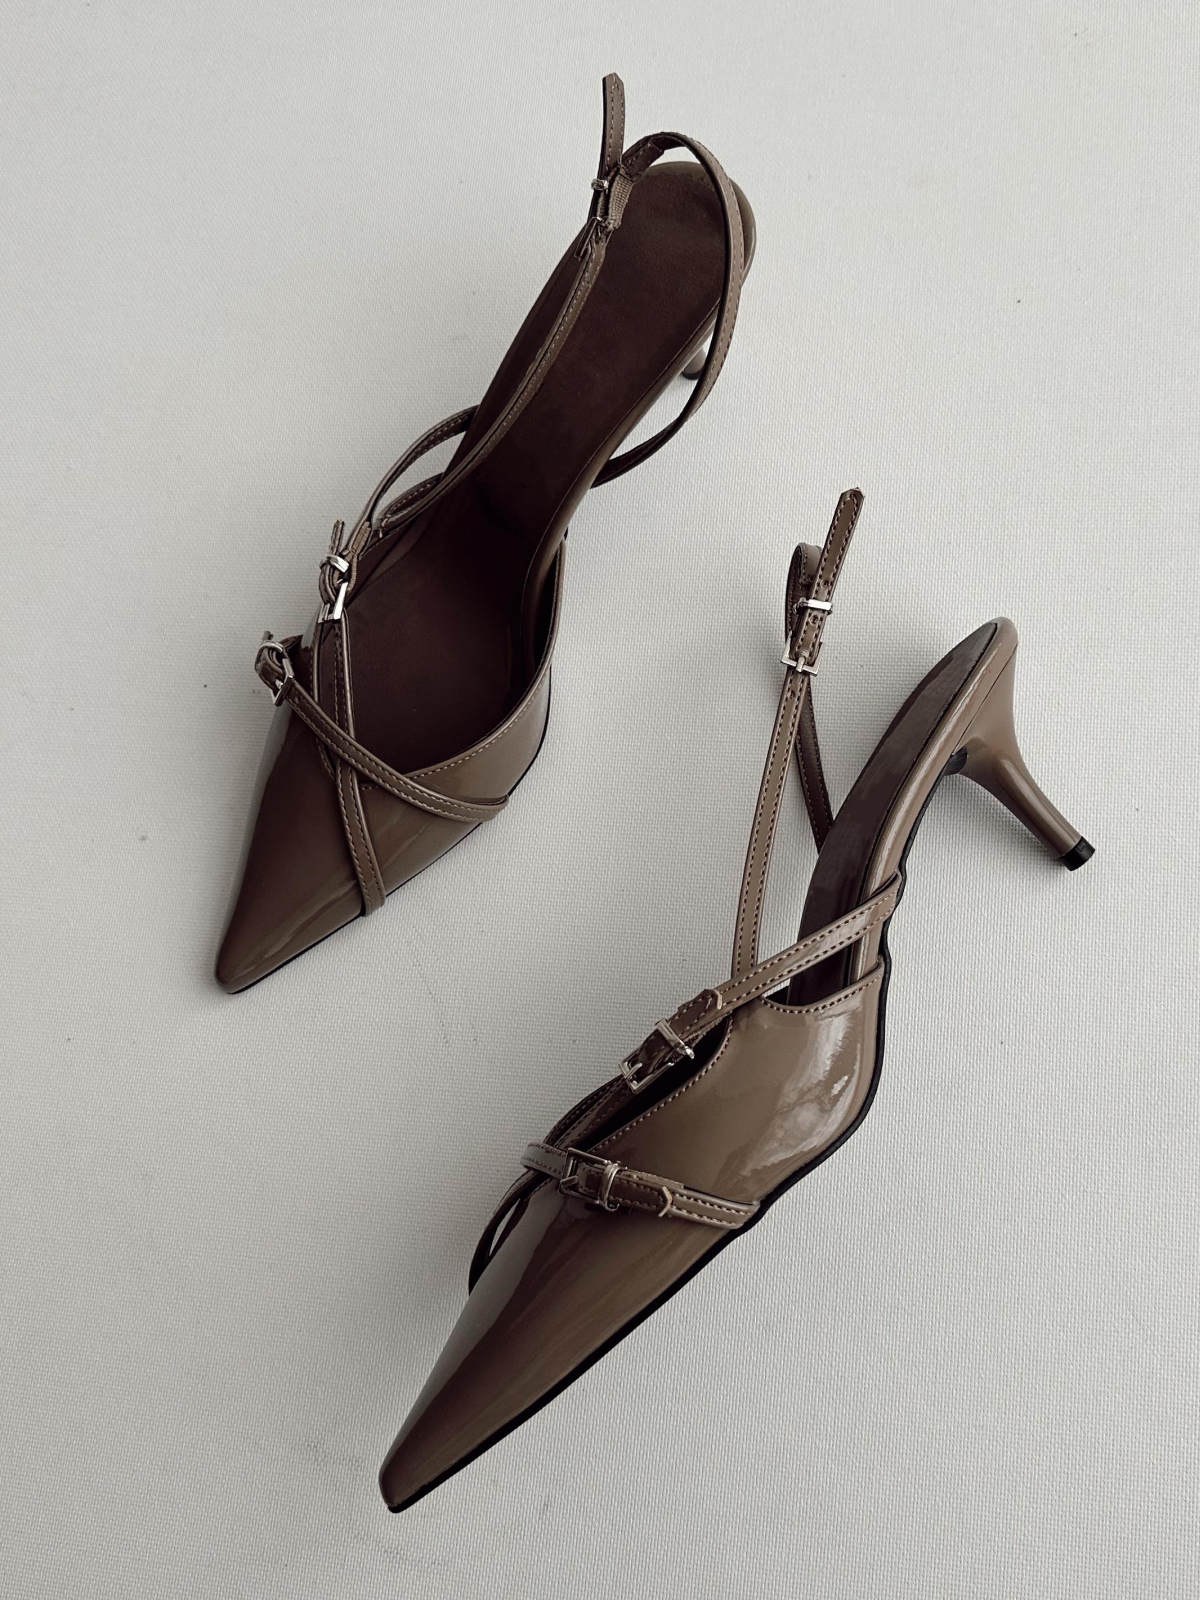 Taupe Patent Buckled Strappy Kitten Heels Slingback Courts Scarpin Pumps